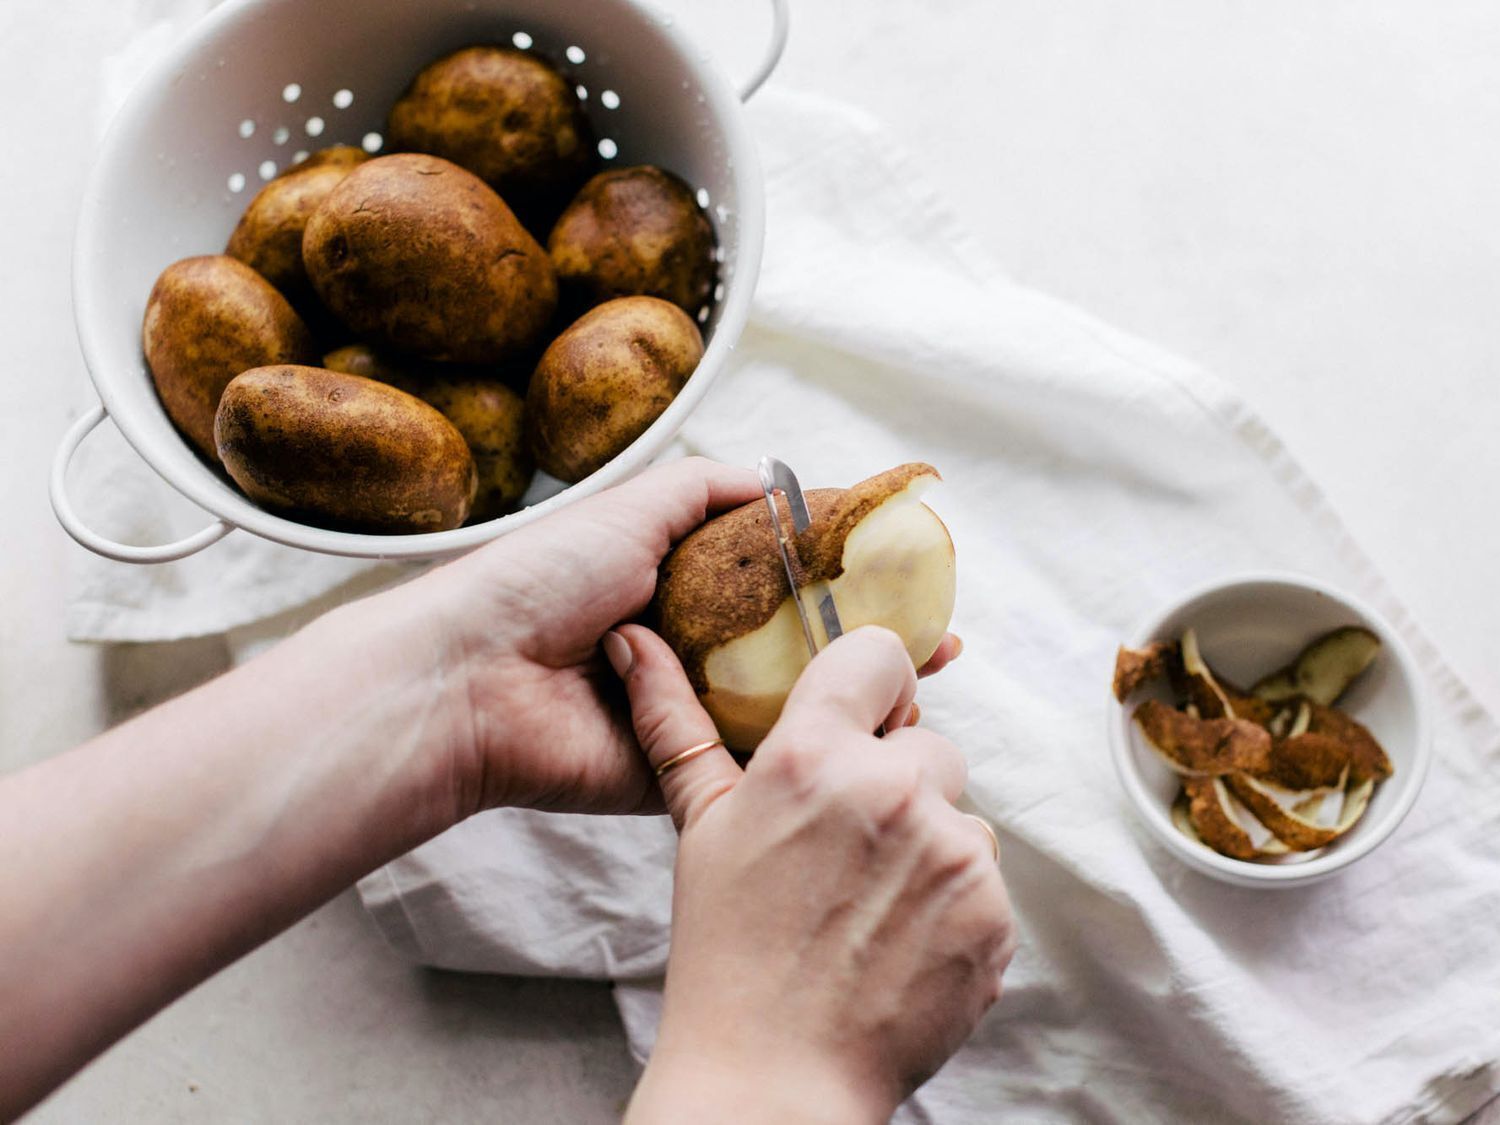 What to add to water when boiling potatoes